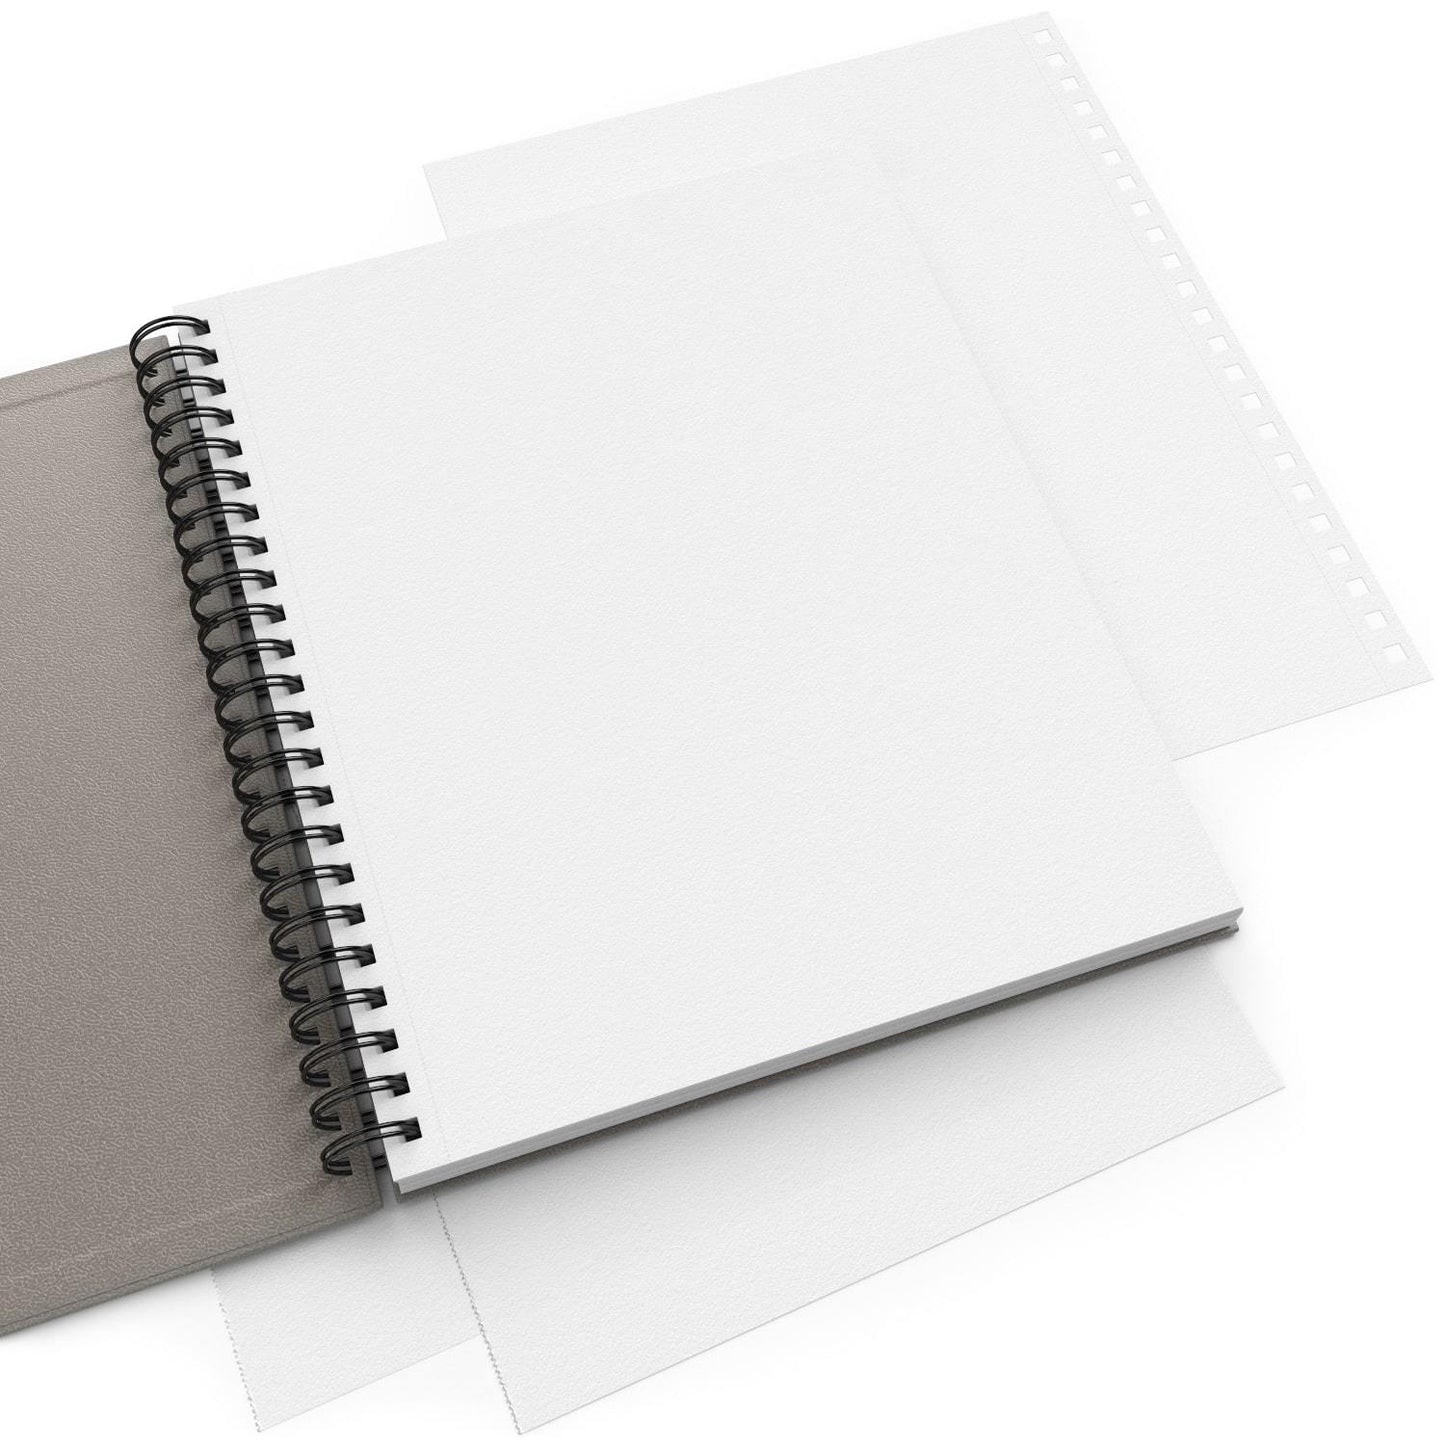 Sax Spiral Binding Sketchbook, 50 lbs, 8-1/2 x 11 Inches, White, 100 Sheets